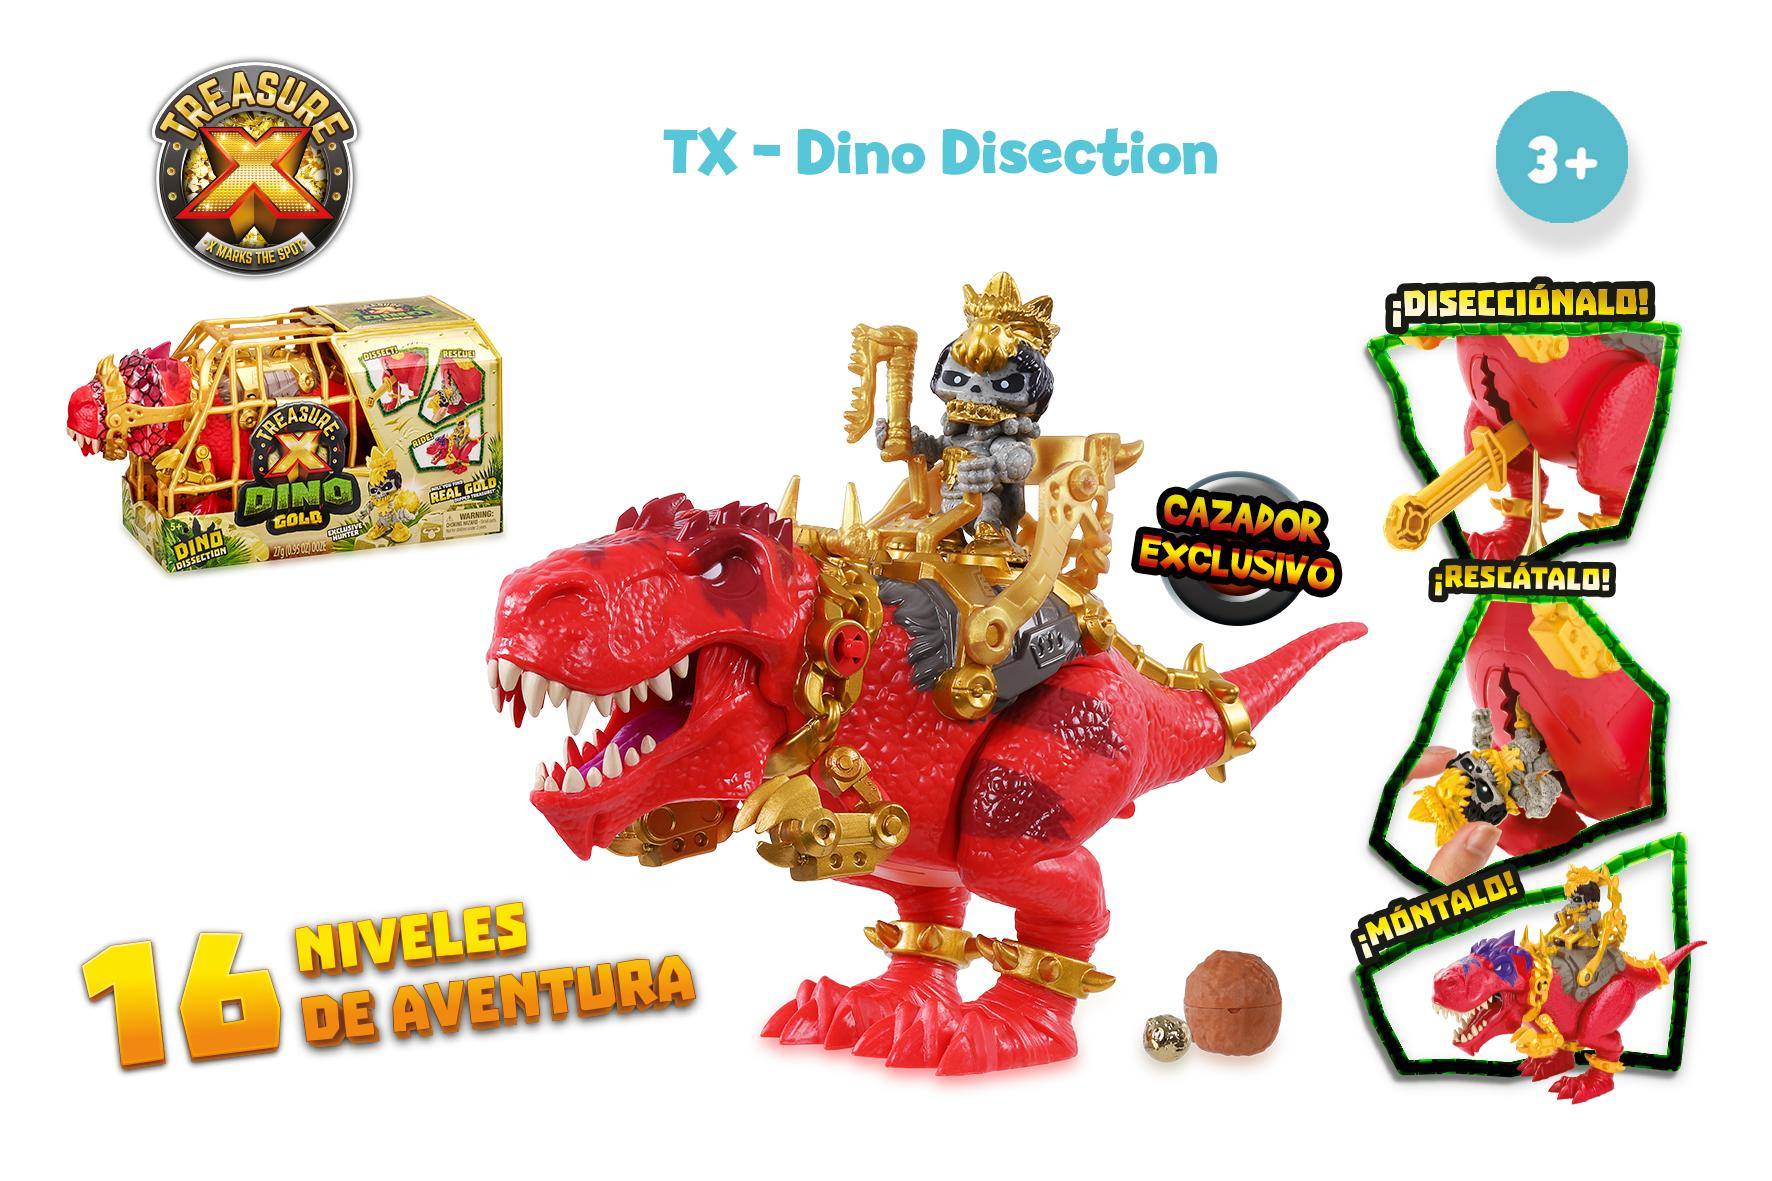 TX DINO DISSECTION TRR45000